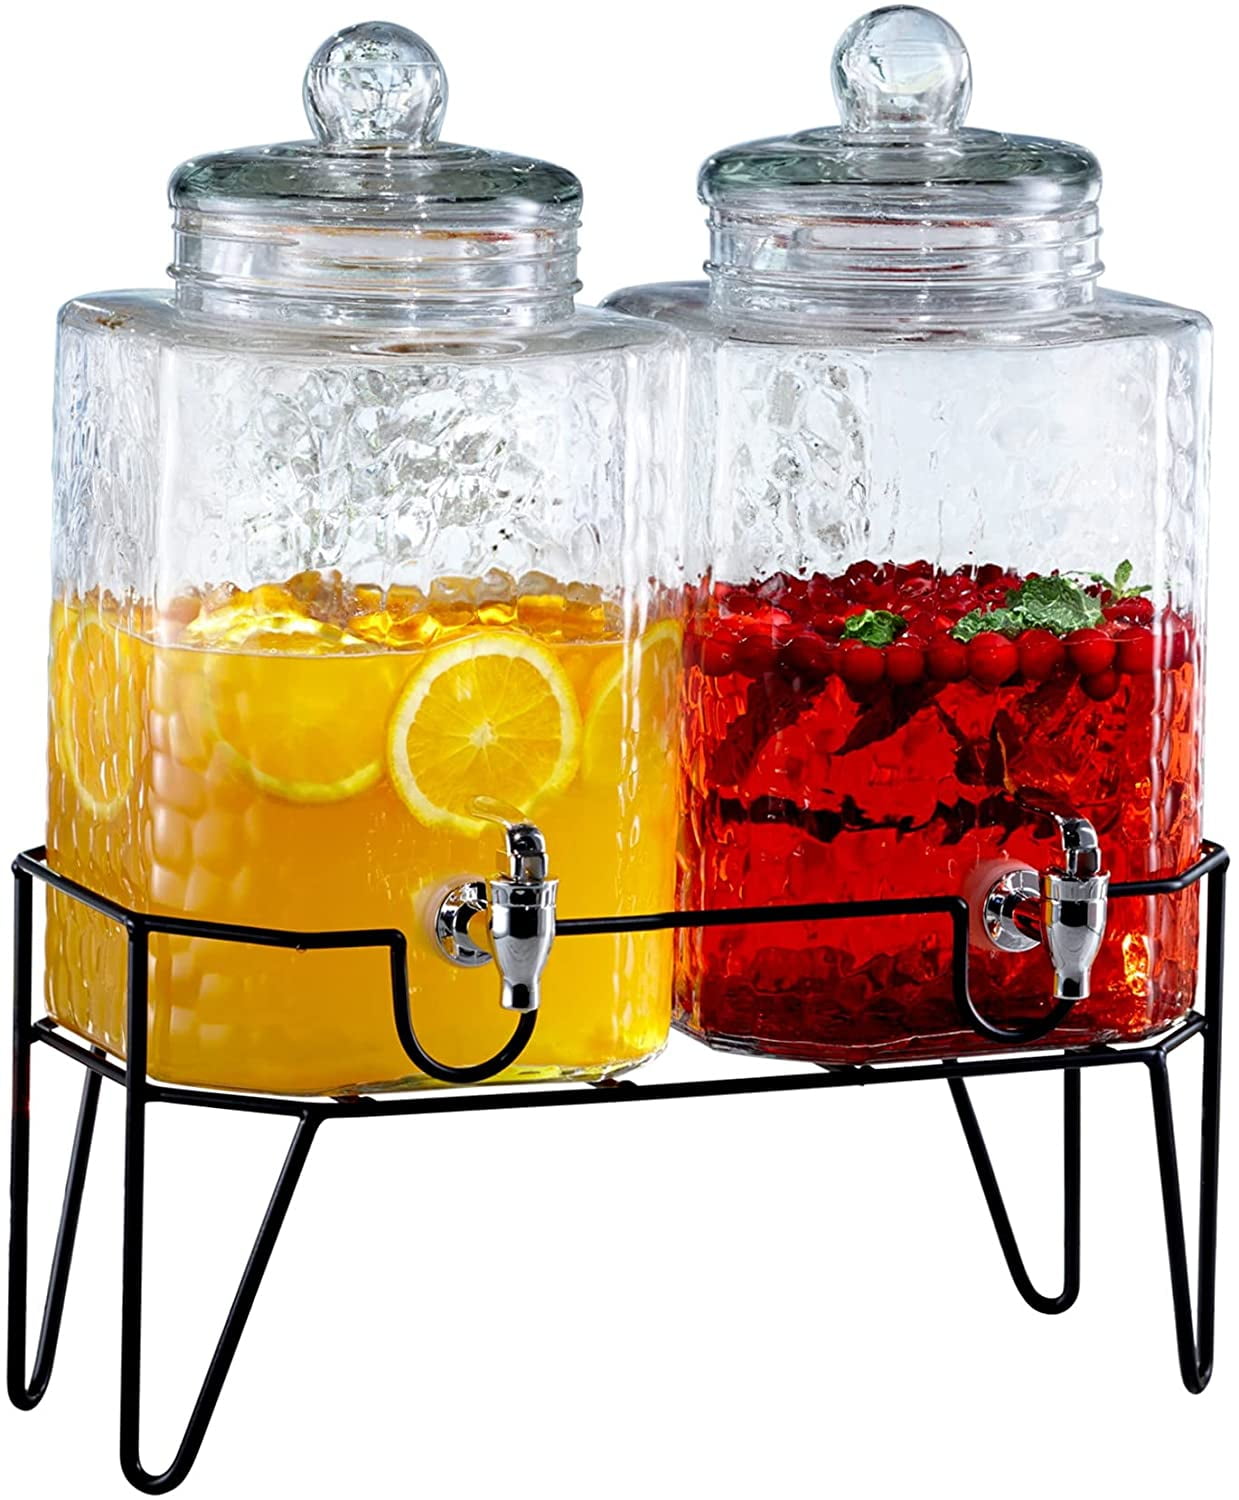 1.45 Gallons Beverage Dispenser with Spigot, Rotate